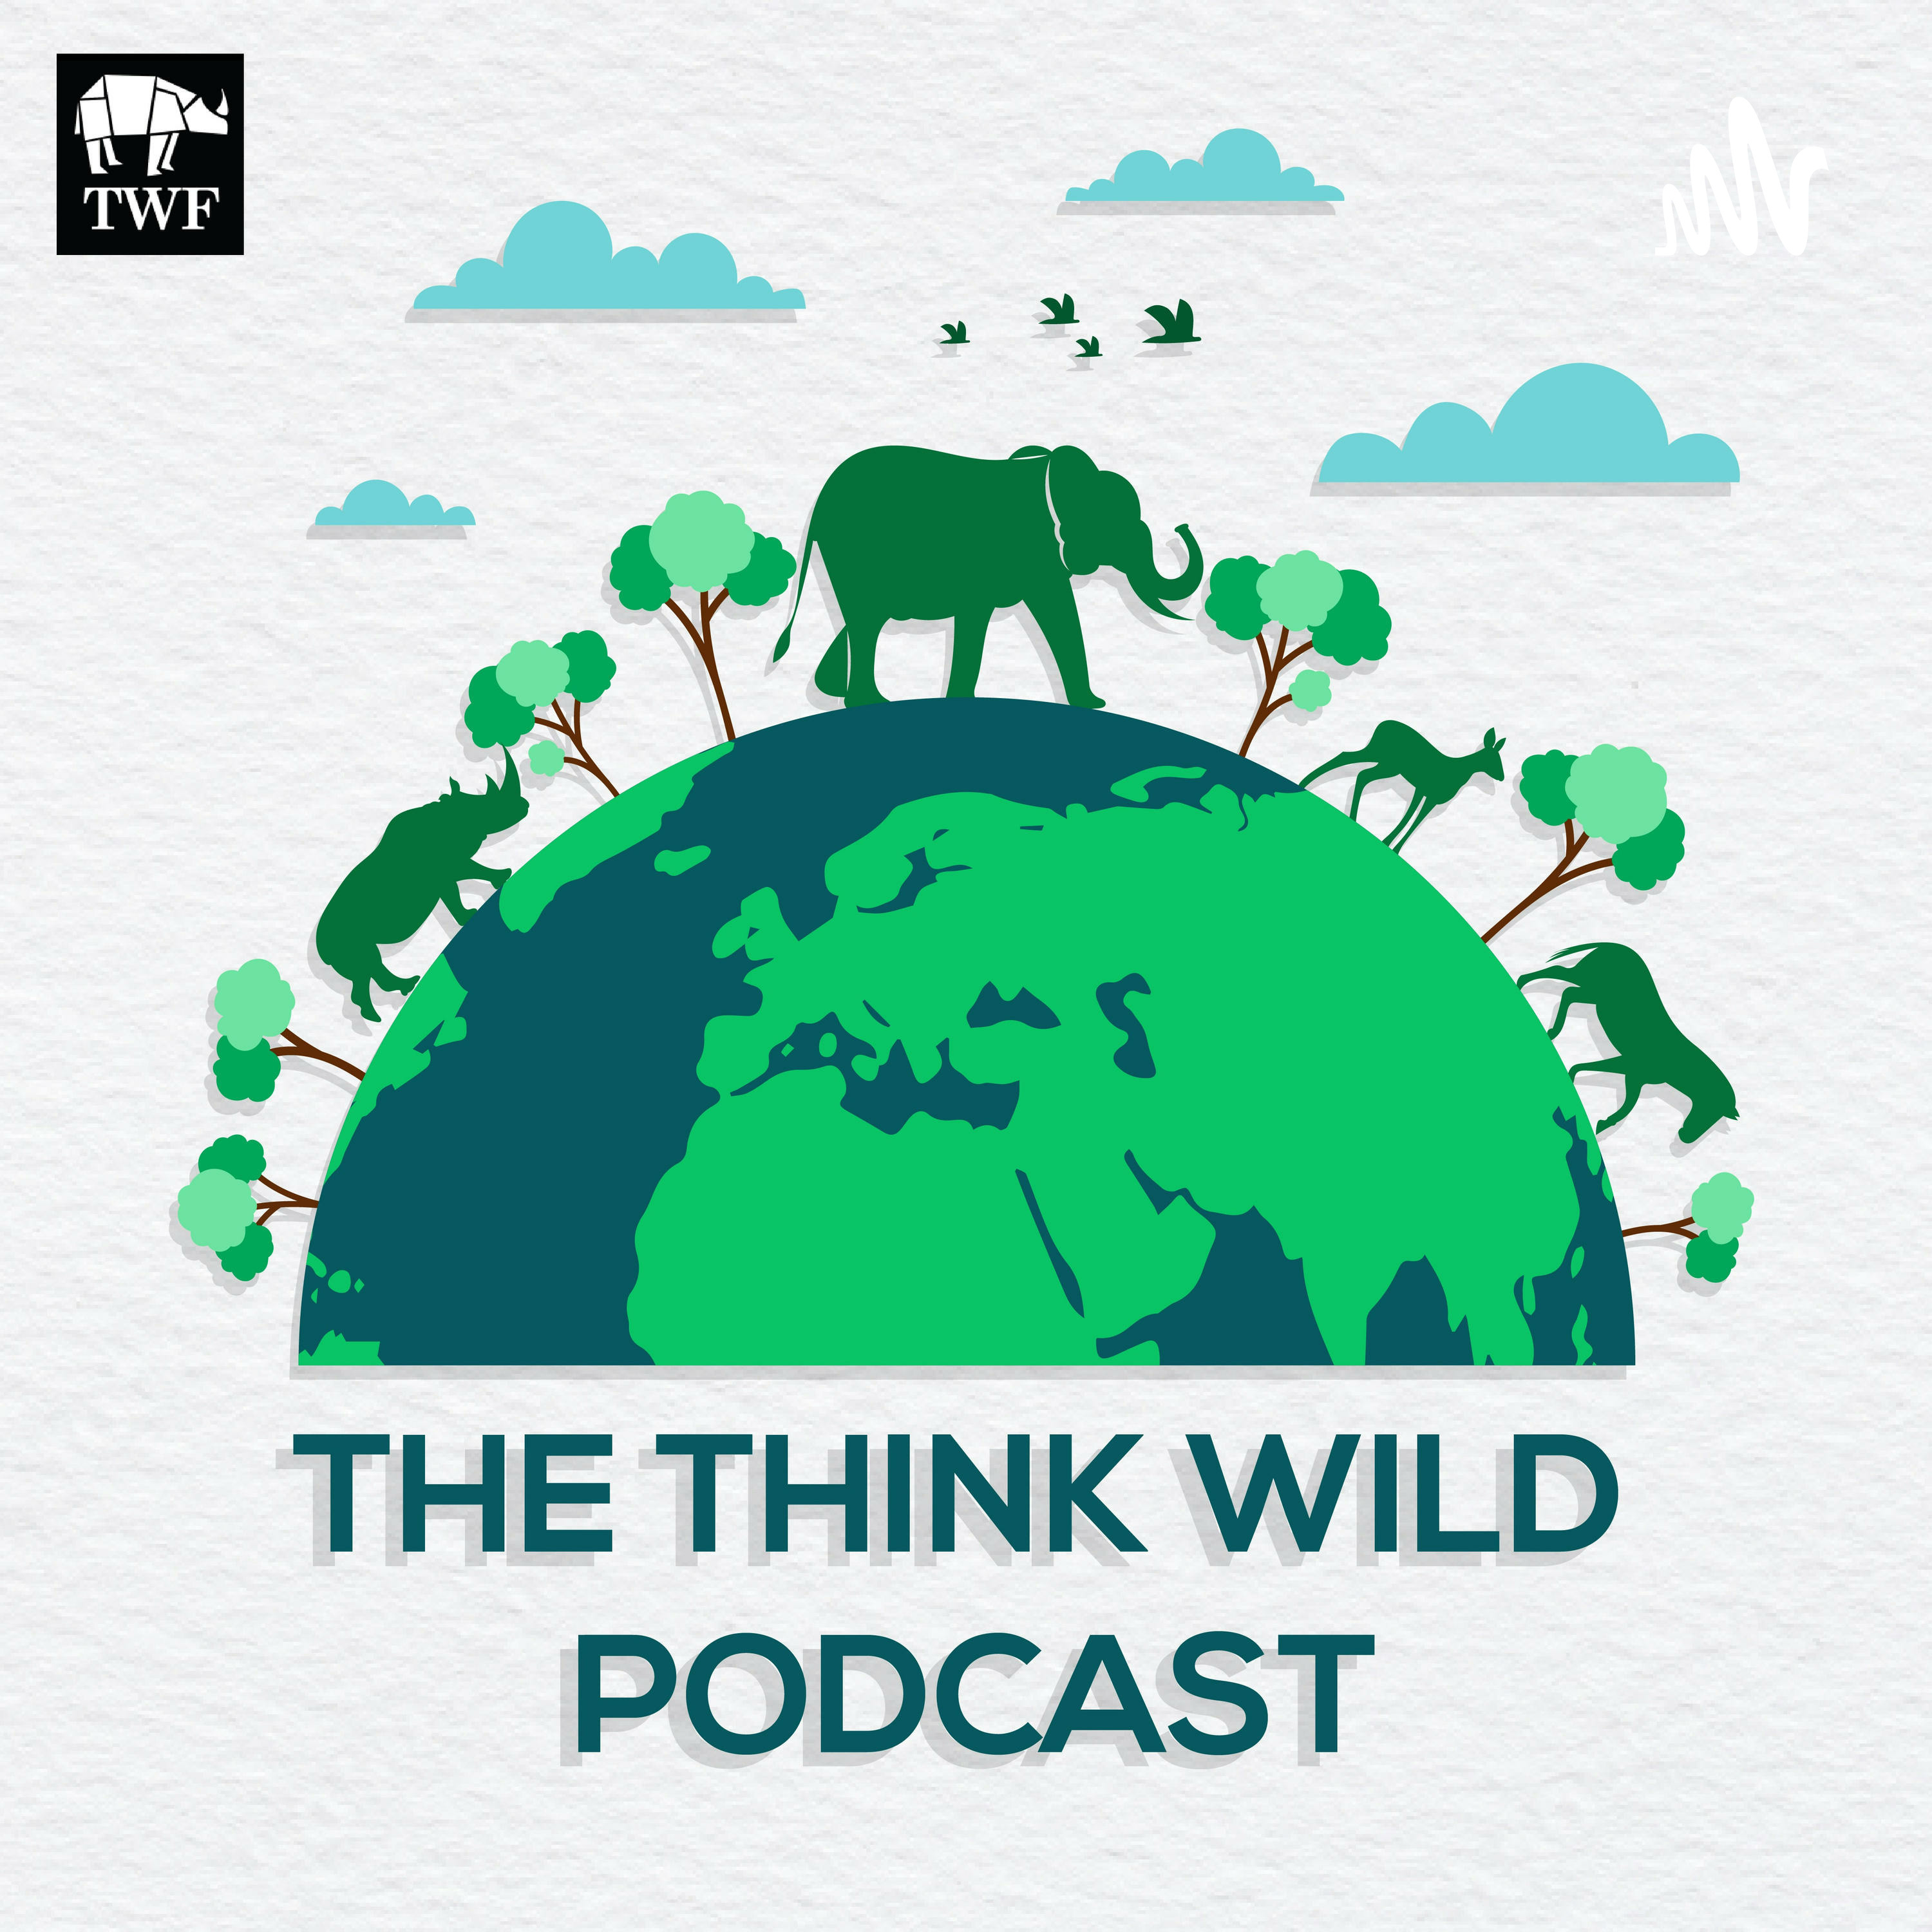 Episode 51: Conserving India’s Wildlife through Nature Writing with Neha Sinha